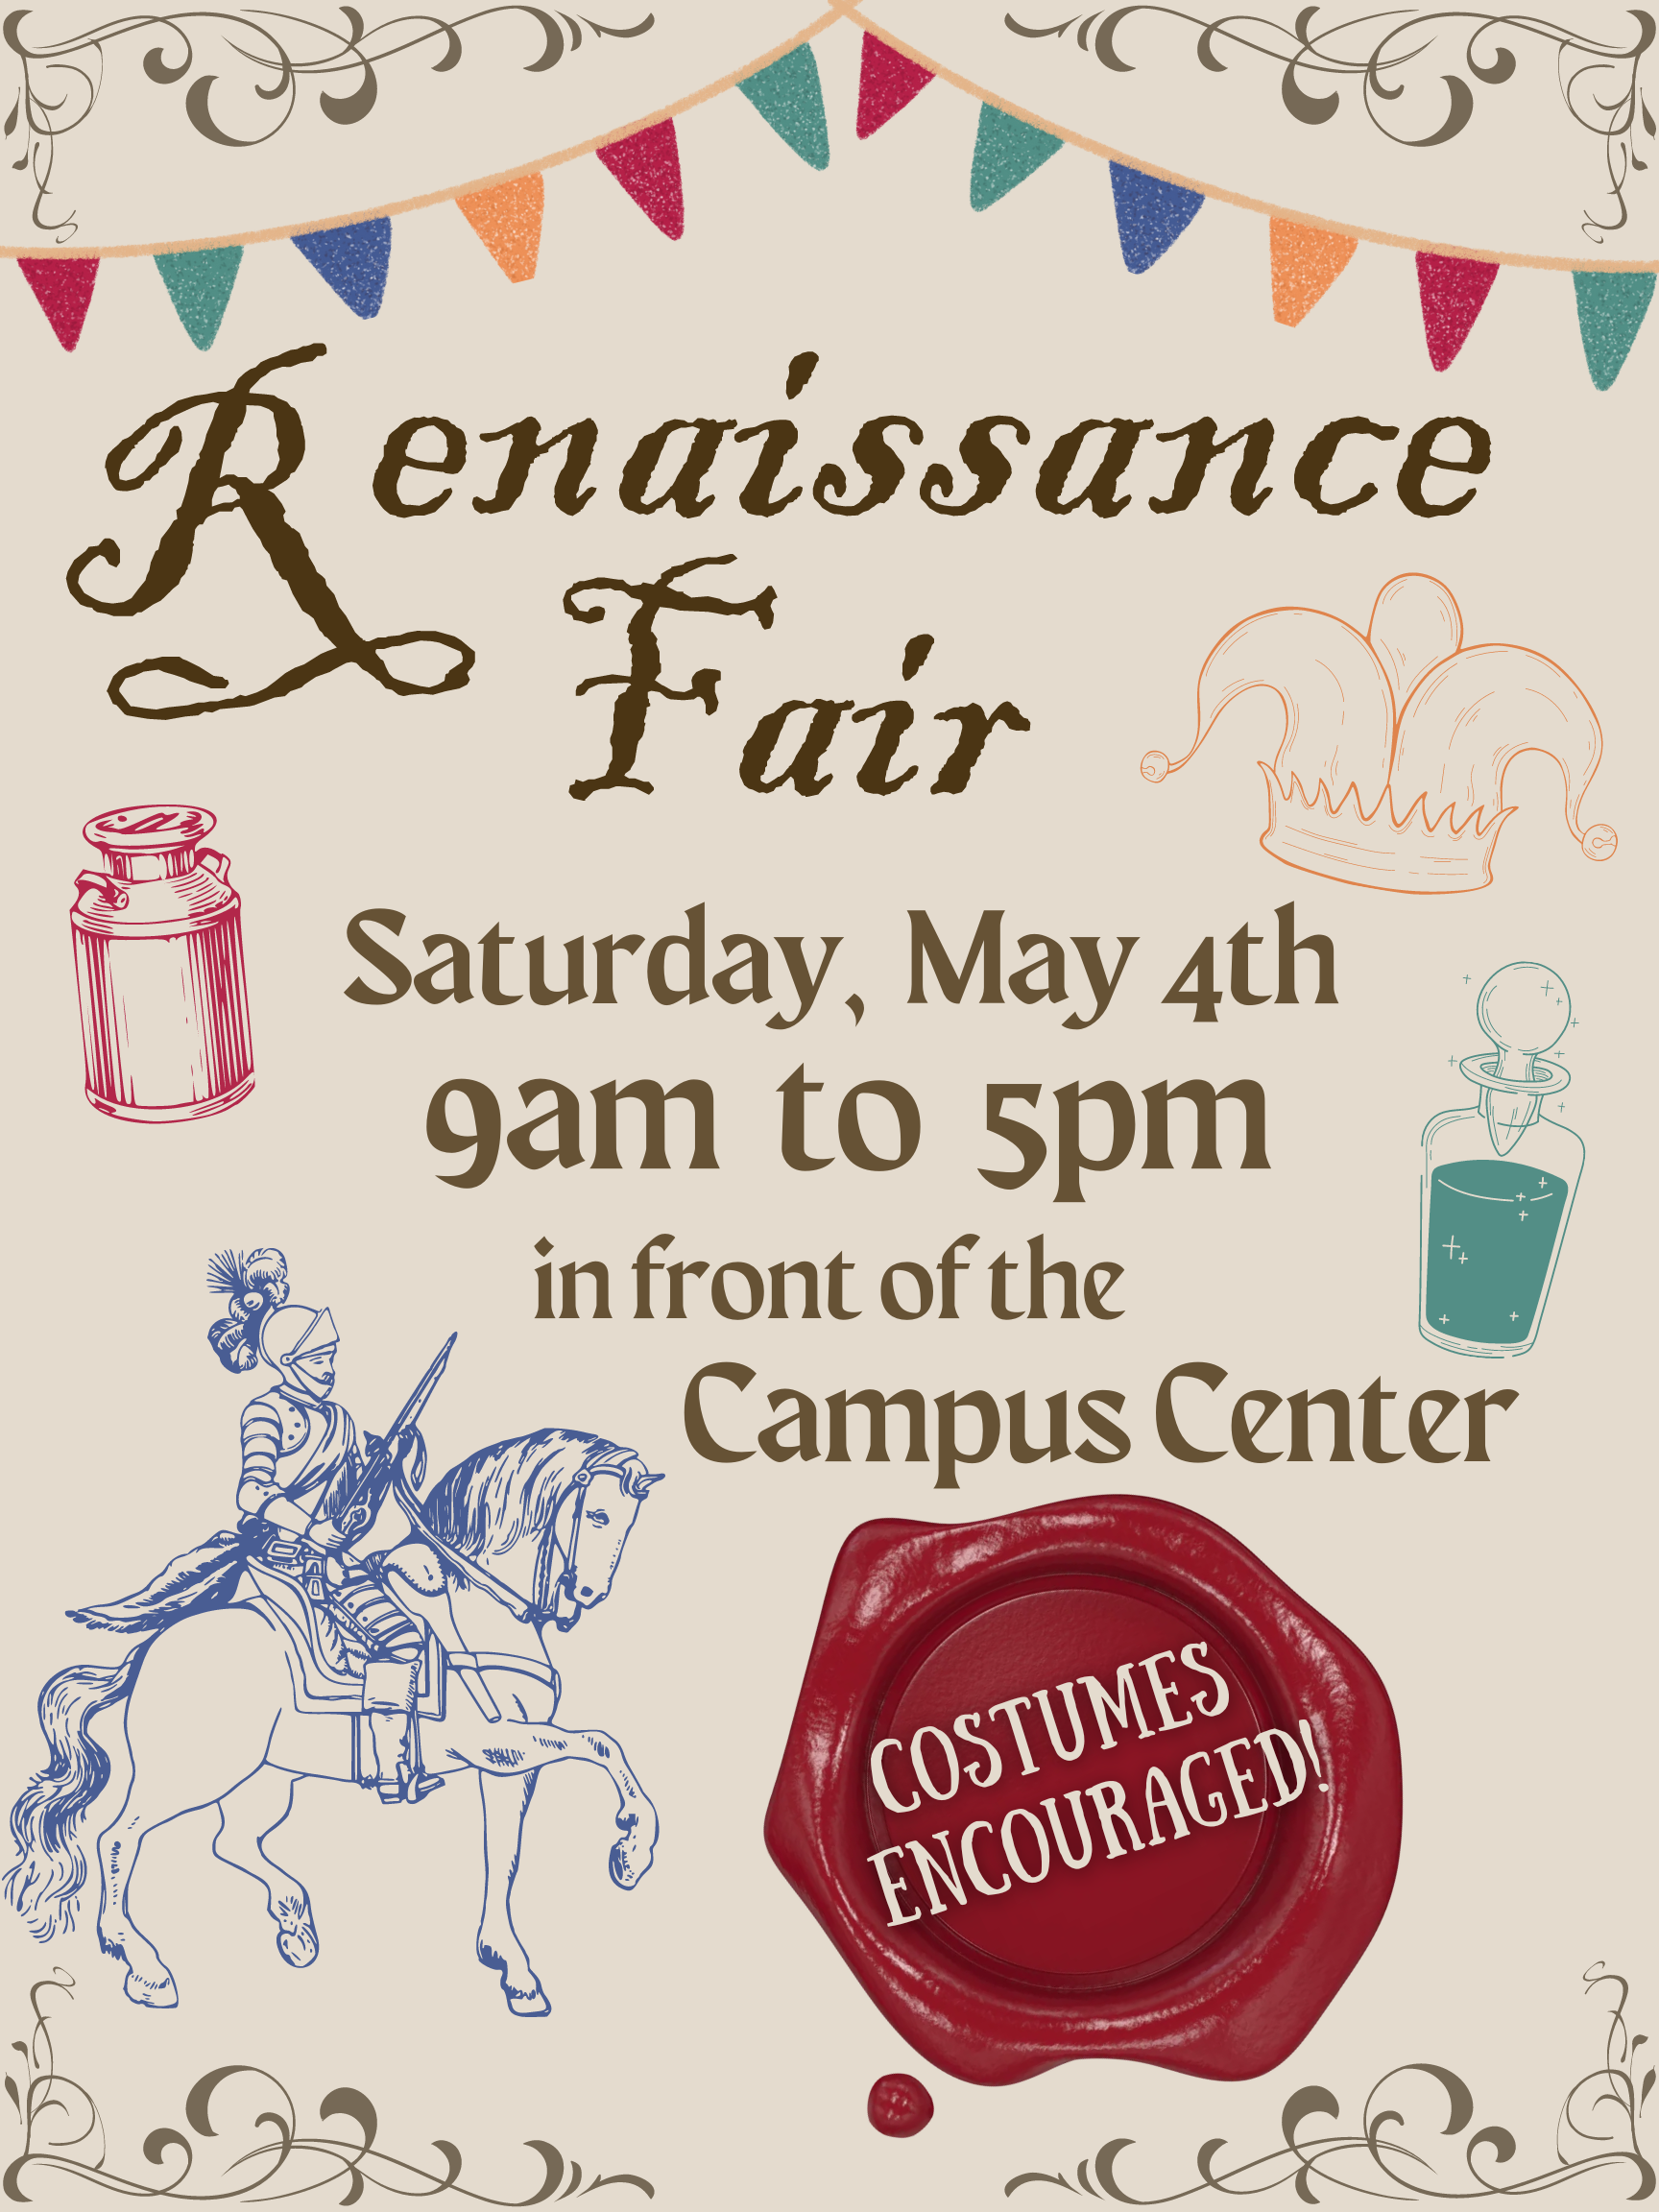 Renaissance Fair!

Saturday, May 4th

9am to 5pm | In front of the Campus Center

*Costumes Encouraged*